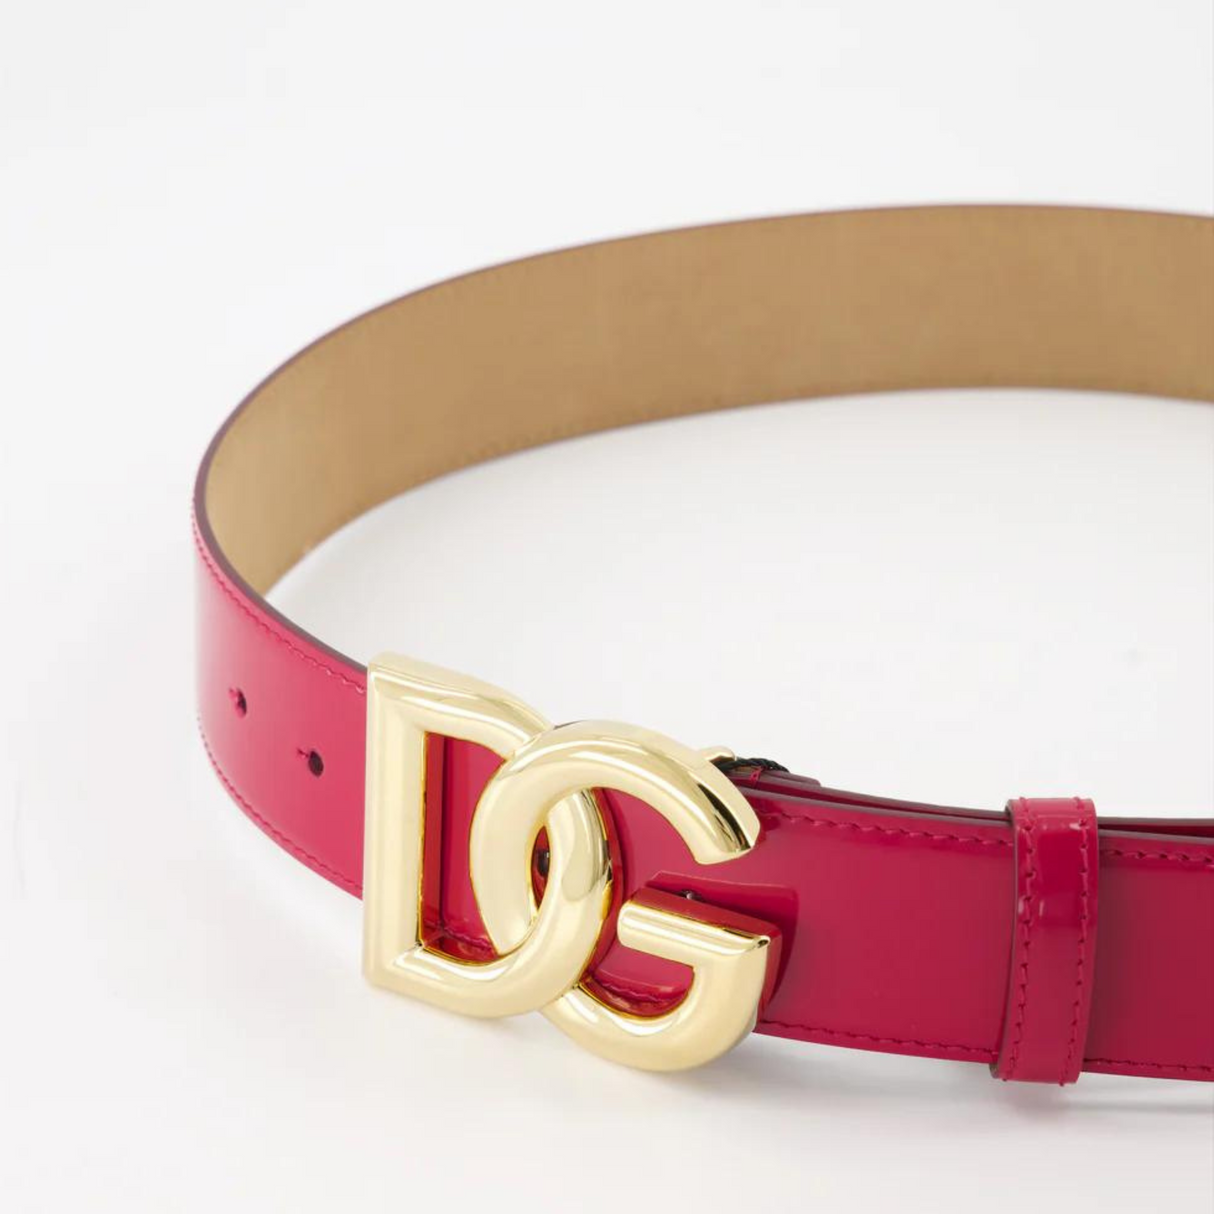 DG Logo Patent Leather in Pink